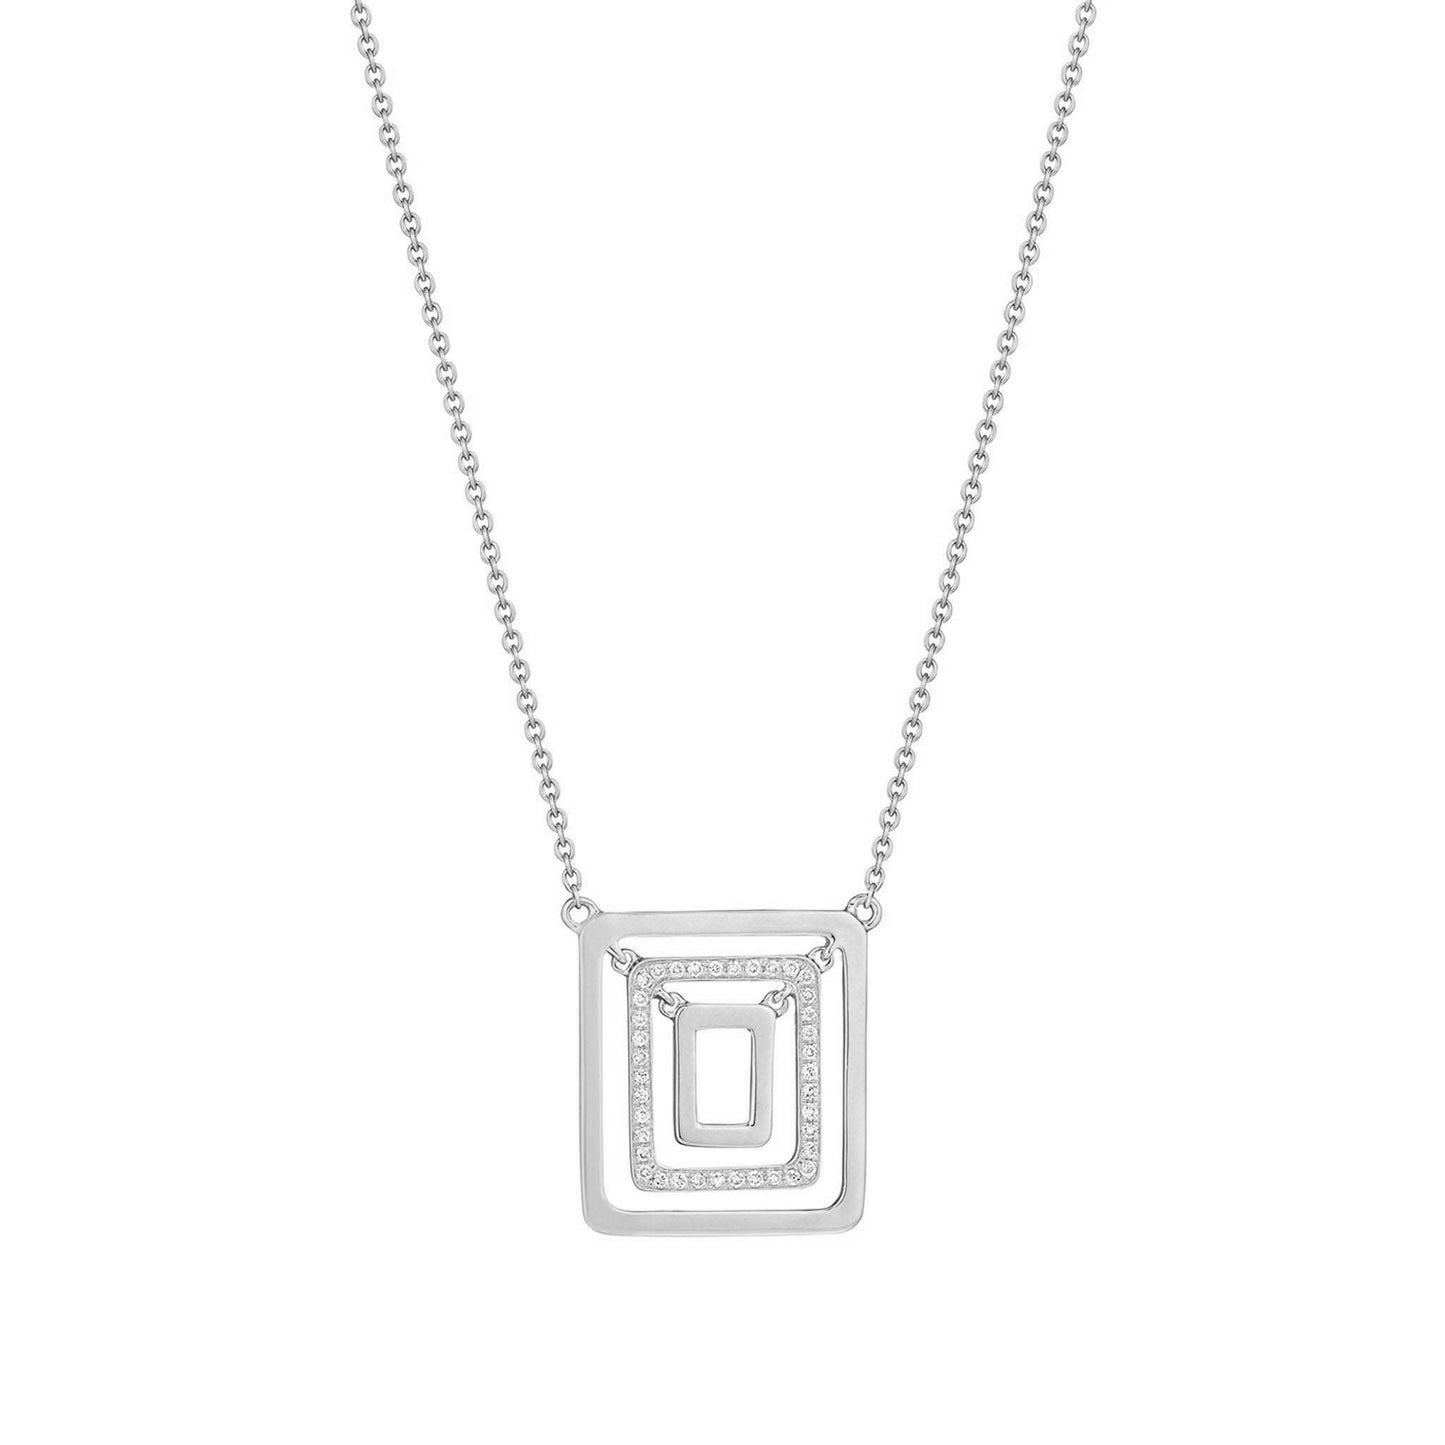 Piece Square Swing Necklace_18k White Gold